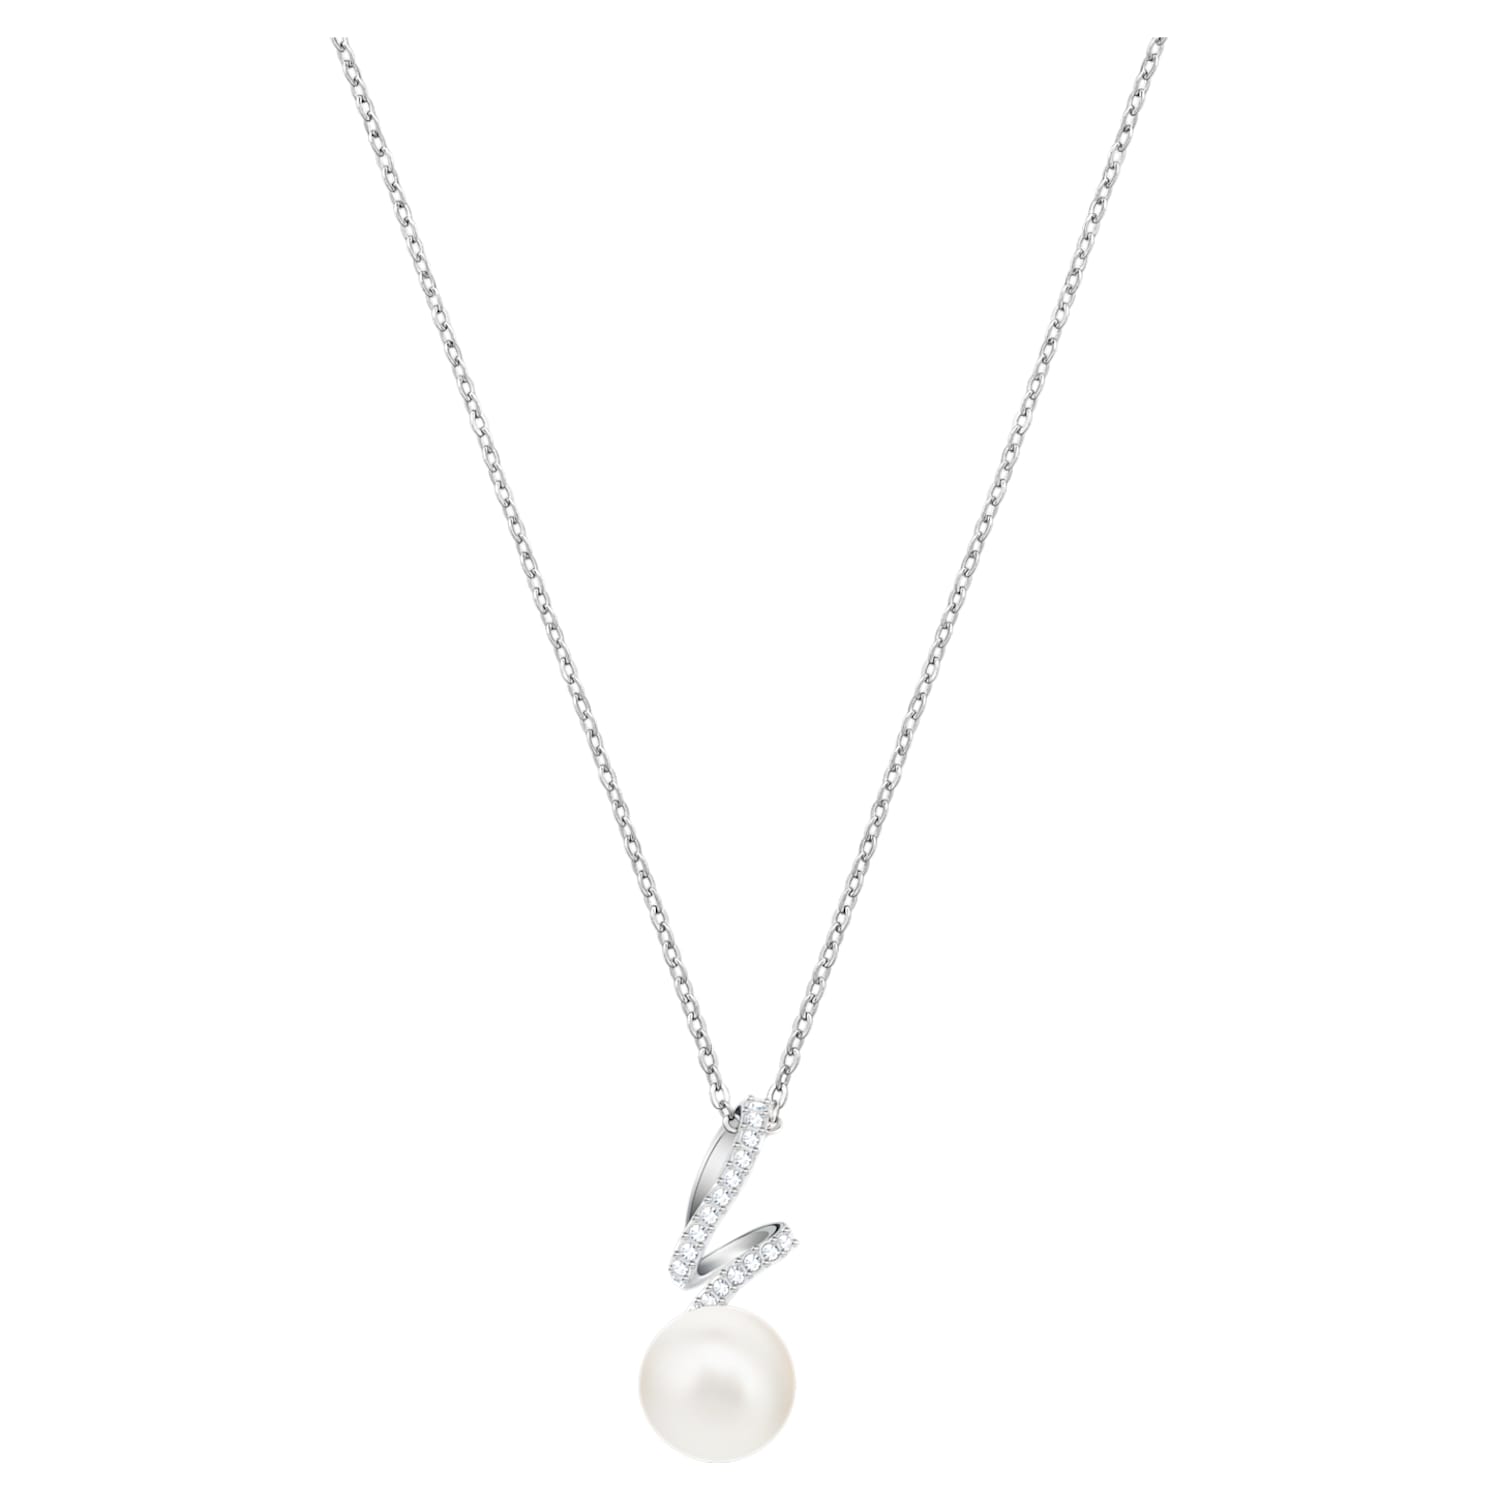 MoAndy Silver Plated Women Necklace Chain Pearl Round White Length 45+5CM 